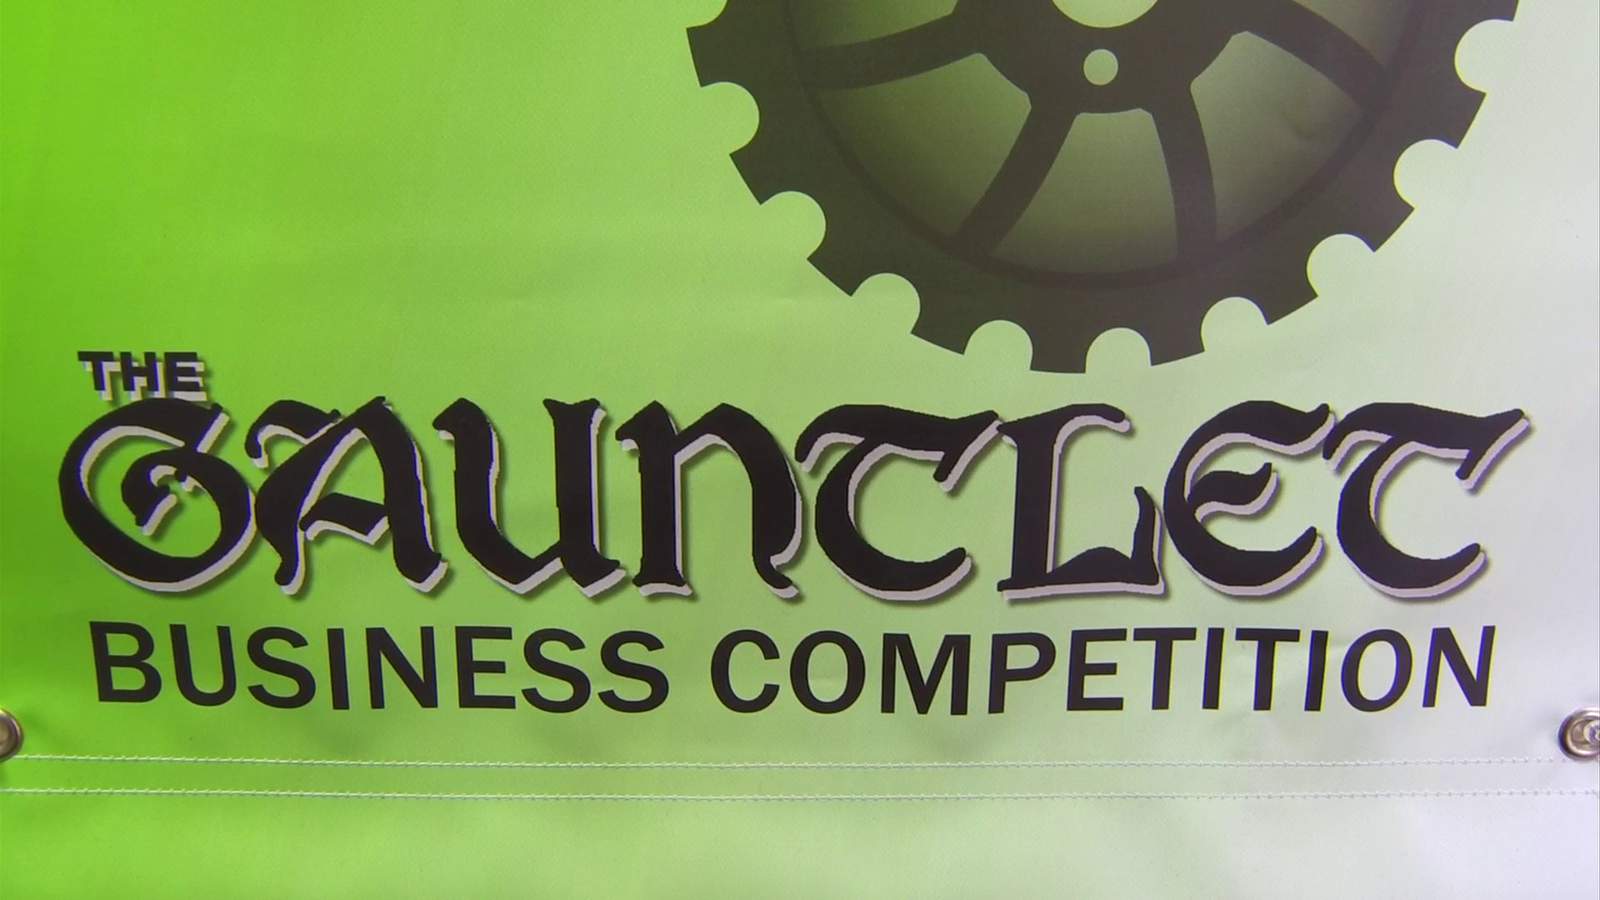 Over 100 local entrepreneurs head to the Gauntlet to bring their business idea to life